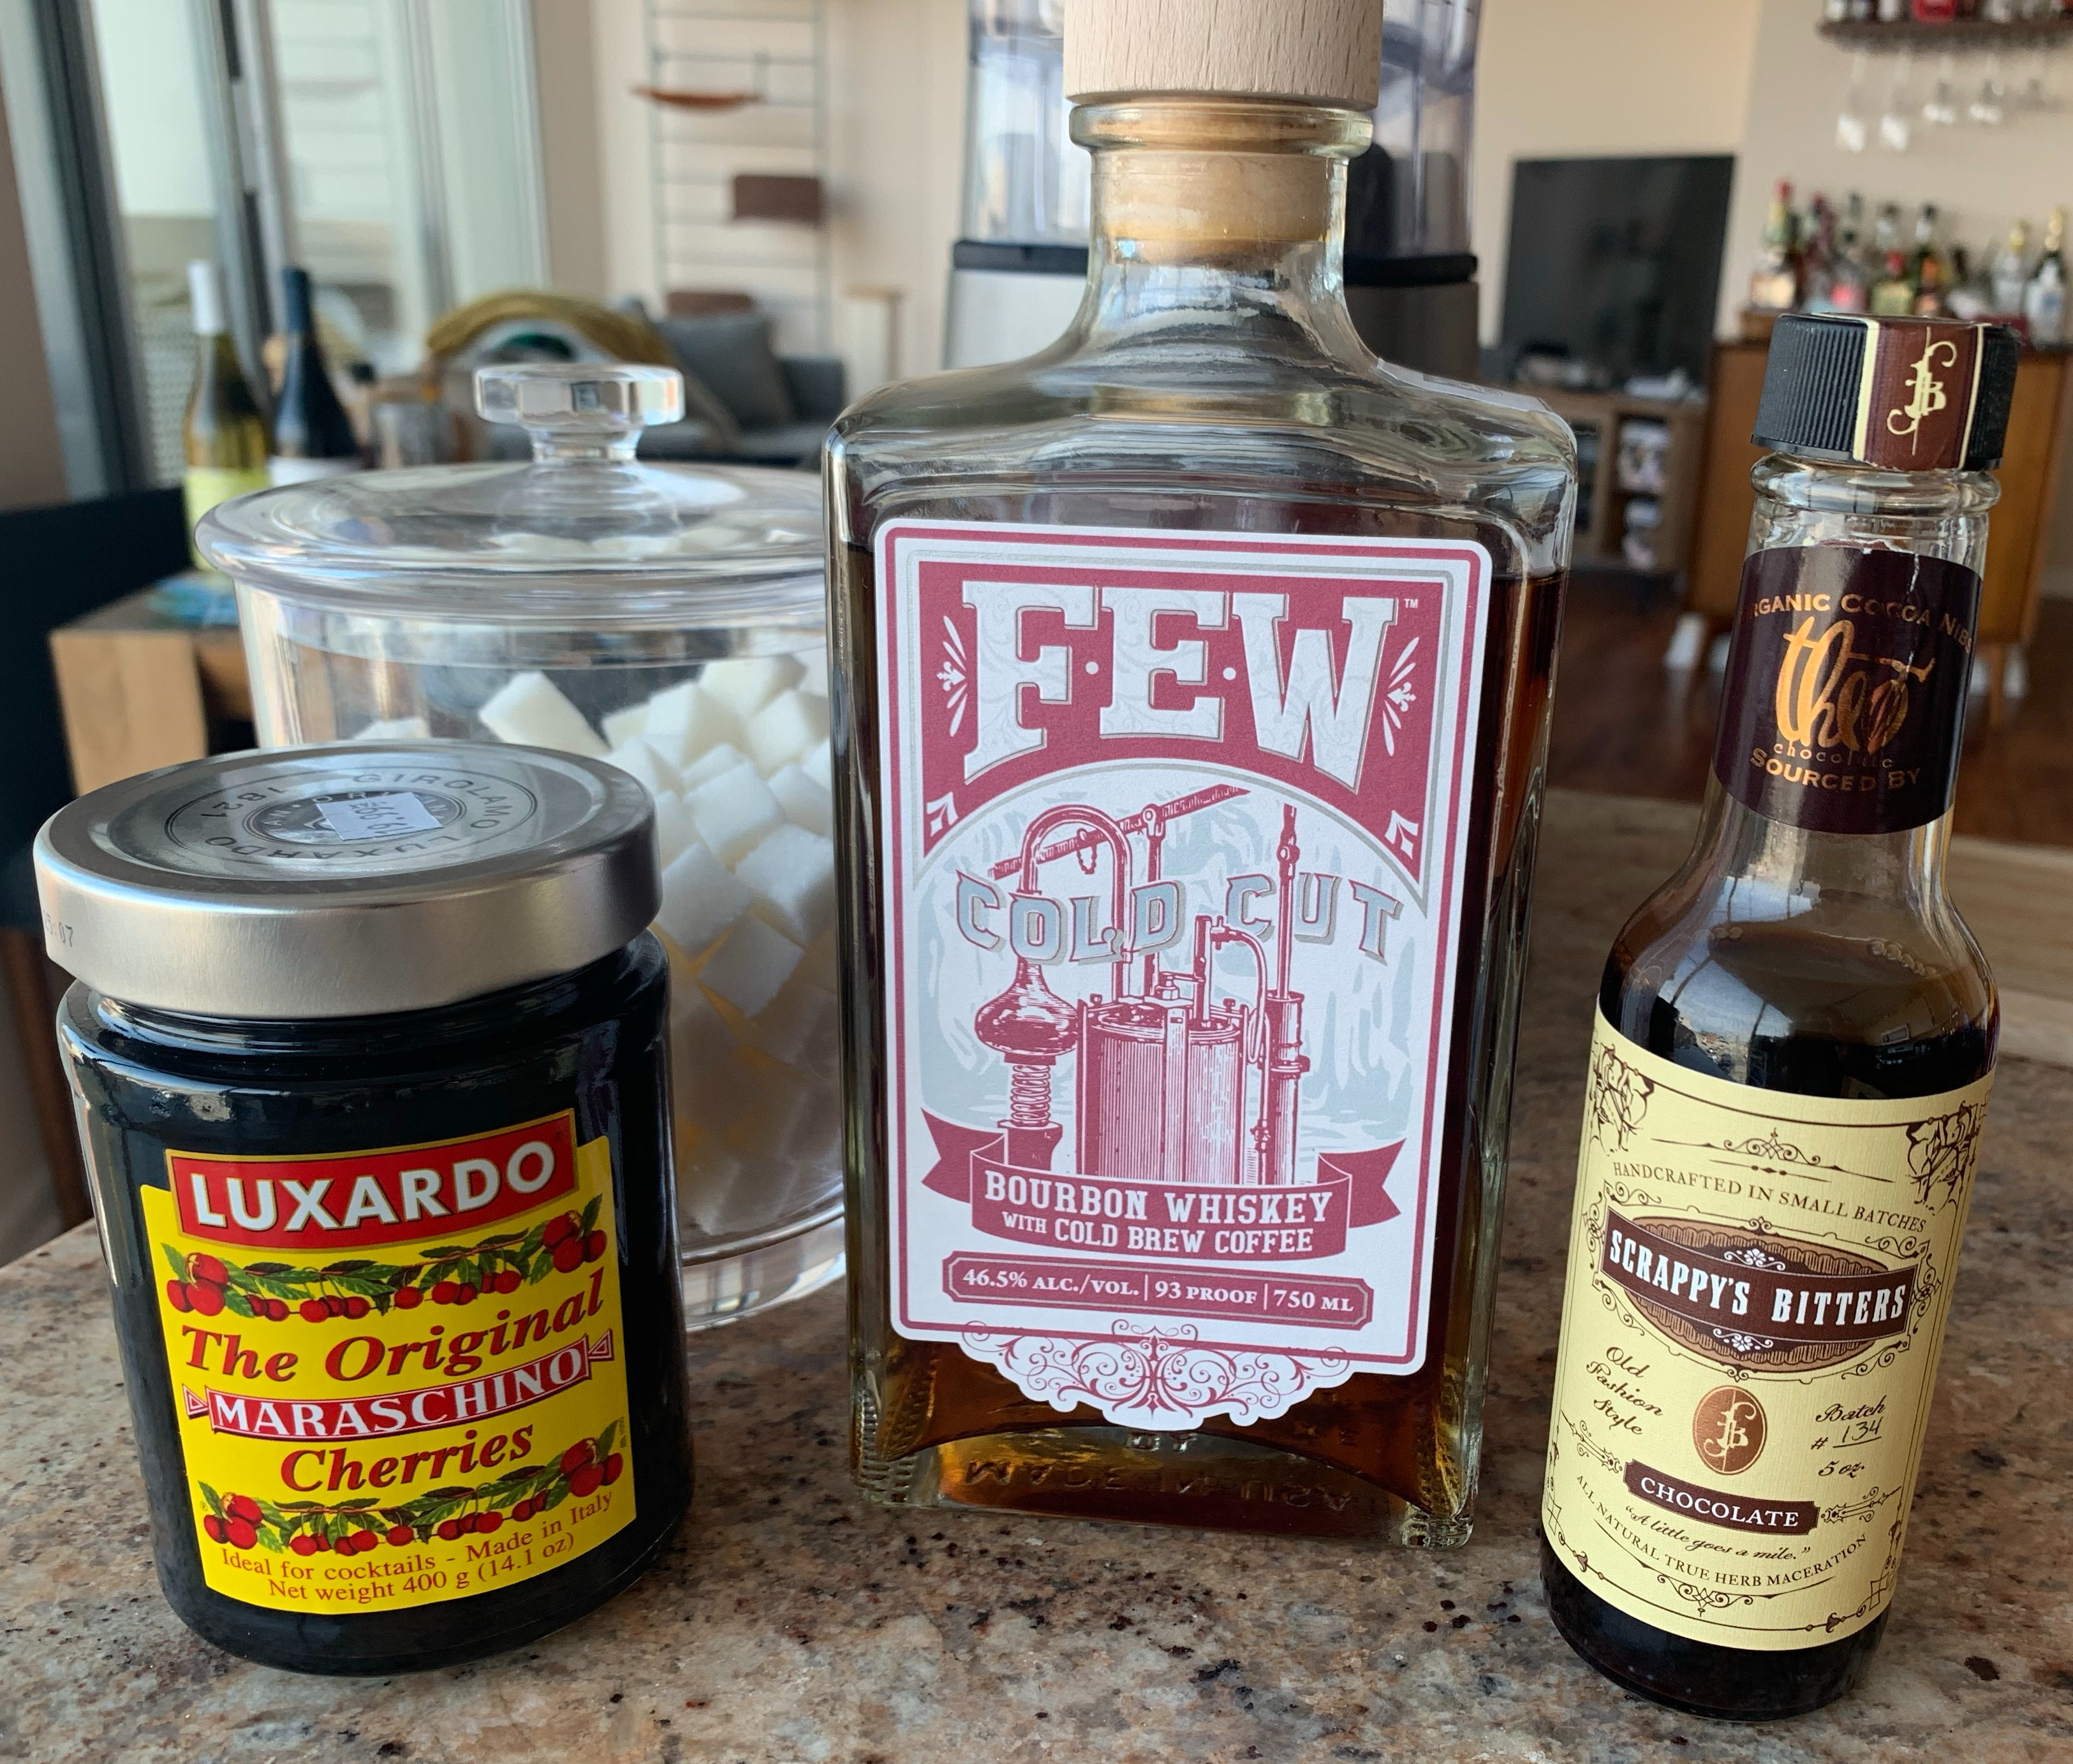 Bottle of the FEW Cold Cut Bourbon Whiskey with Cold Brew Coffee, flanked by chocolate bitters and a jar of maraschino cherries. A container of sugar cubes are in the background.